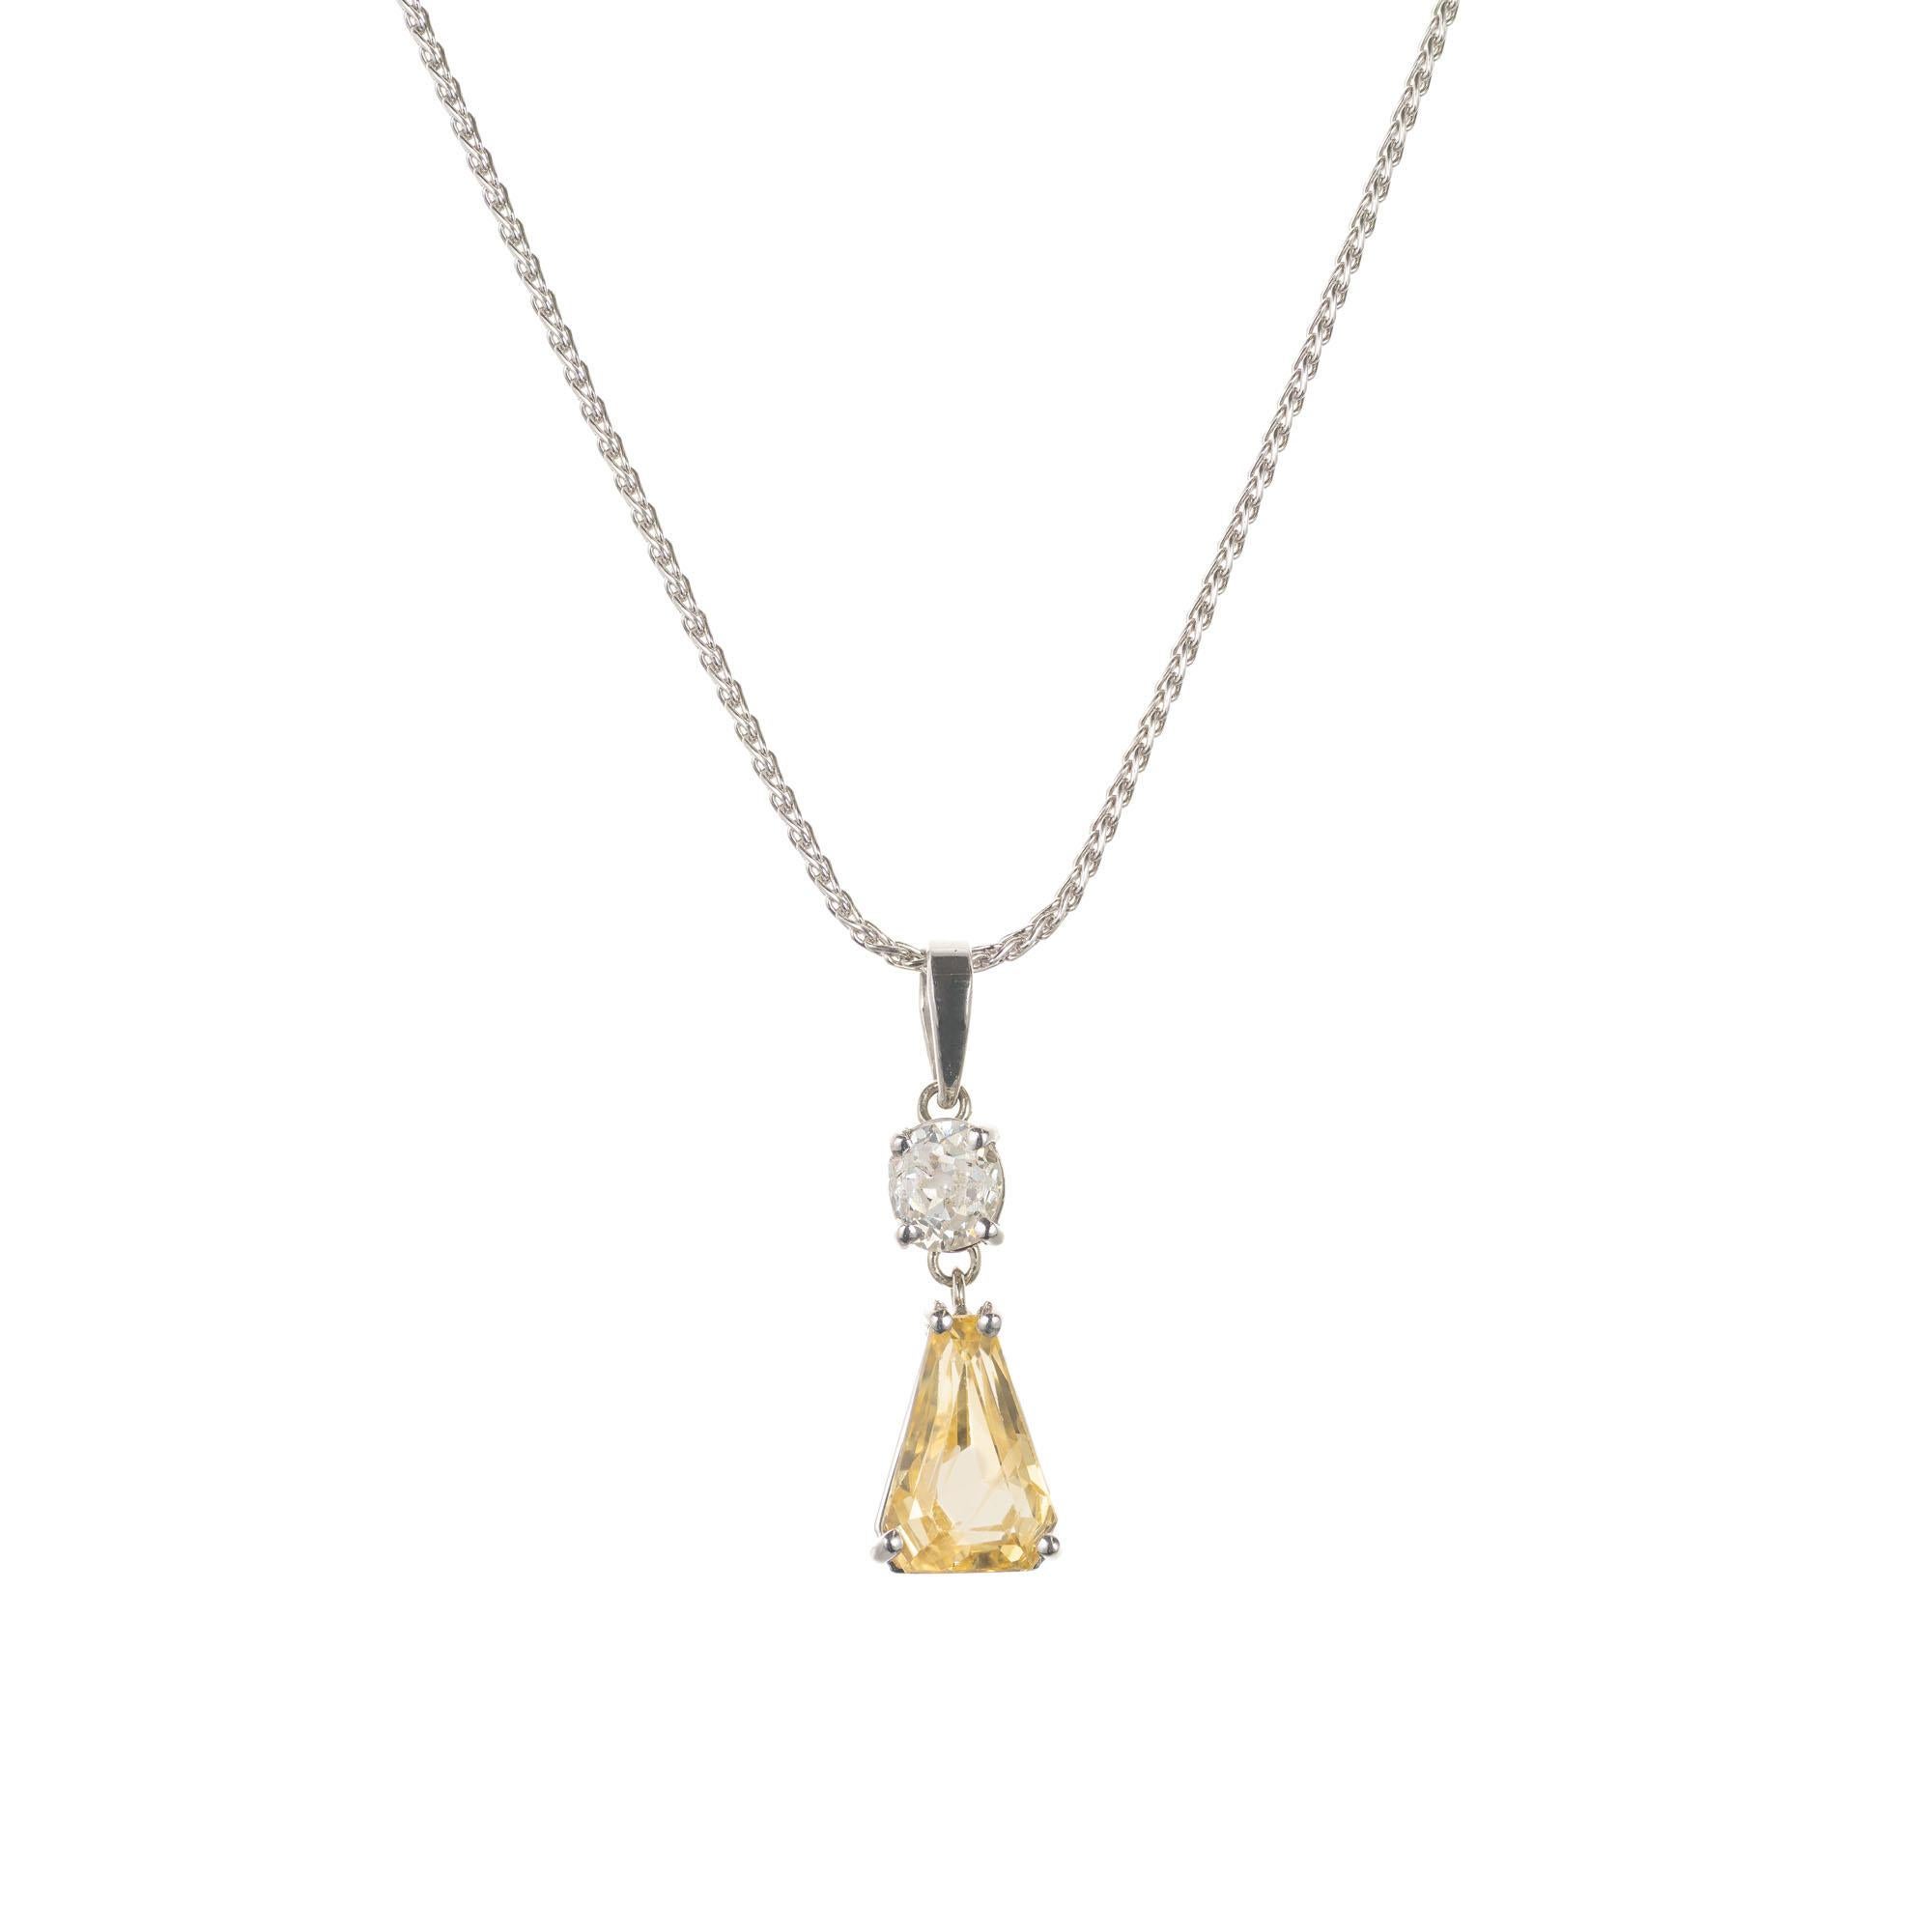 Peter Suchy natural yellow sapphire and diamond pendant necklace. Handmade platinum setting with a  GIA certified shield cut lemon yellow natural sapphire accented by an old mine cut accent diamond. 

1 shield cut yellow sapphire, Approximate total